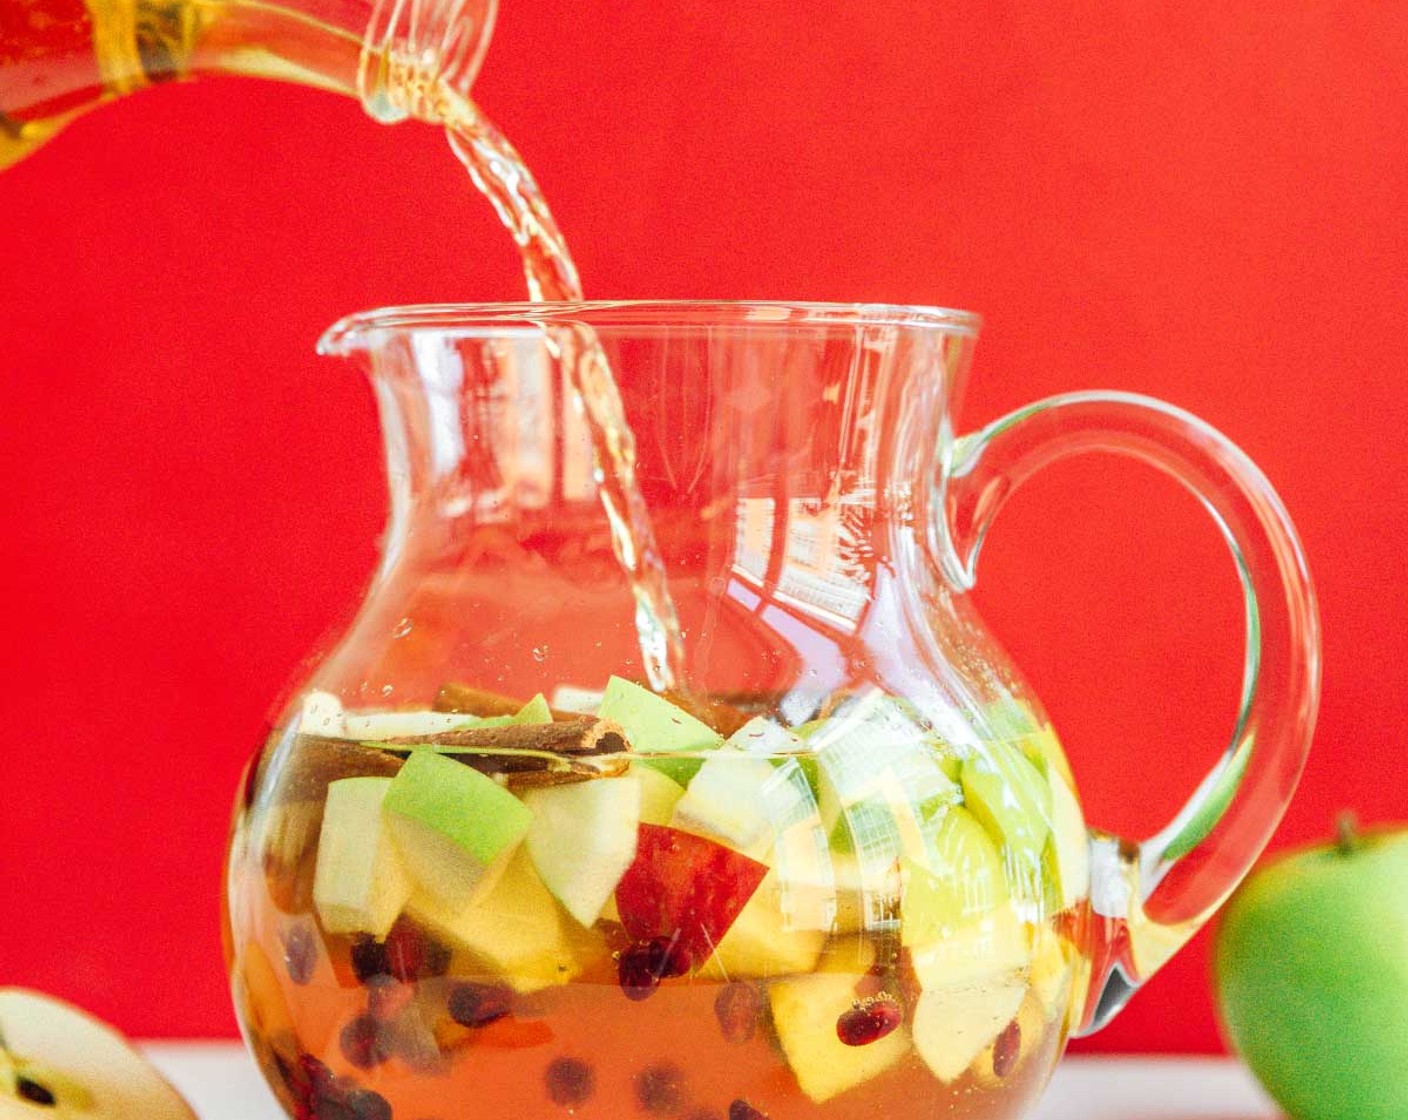 step 1 In a large pitcher, combine Apples (2), Pomegranate Seeds (1/2 cup), Cinnamon Sticks (4), Dry White Wine (1 bottle), Apple Cider (3 cups), and Apricot Brandy (1/4 cup). If you have time, set the pitcher in the fridge for a few hours to allow flavors to blend.